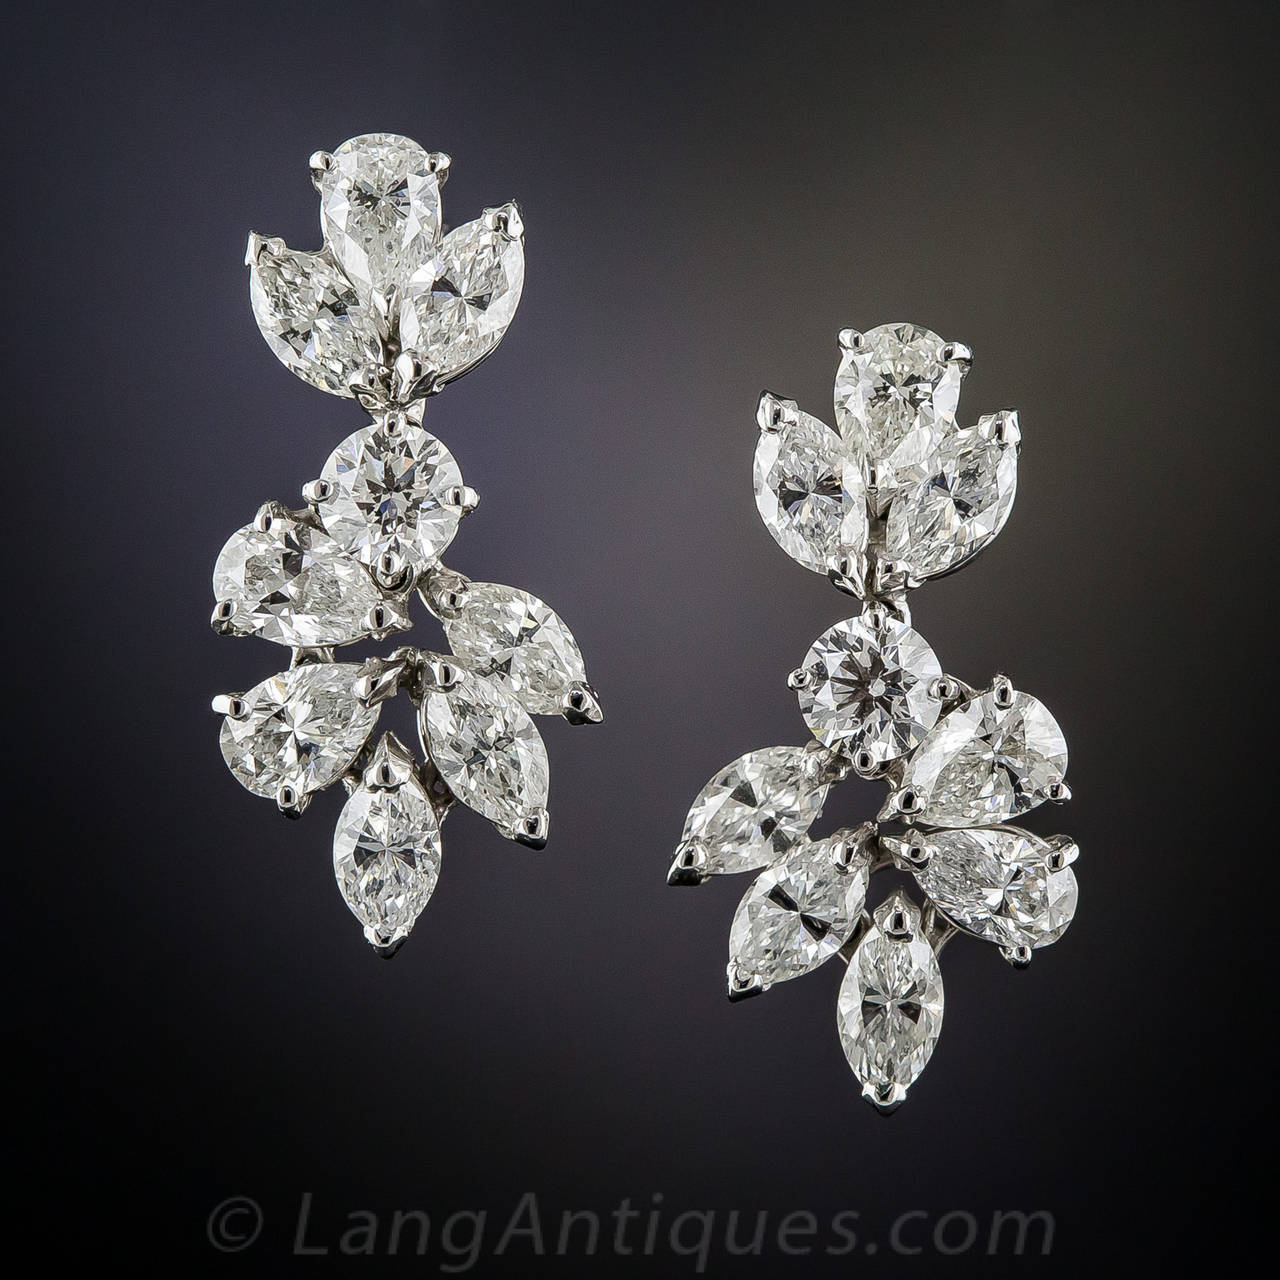 A harmonious medley of bright white and beautiful marquise and pear shape diamonds, divided by one round brilliant-cut diamond, swing and sway and throw off sparks in all directions in these classic Harry Winston style drop earrings - circa